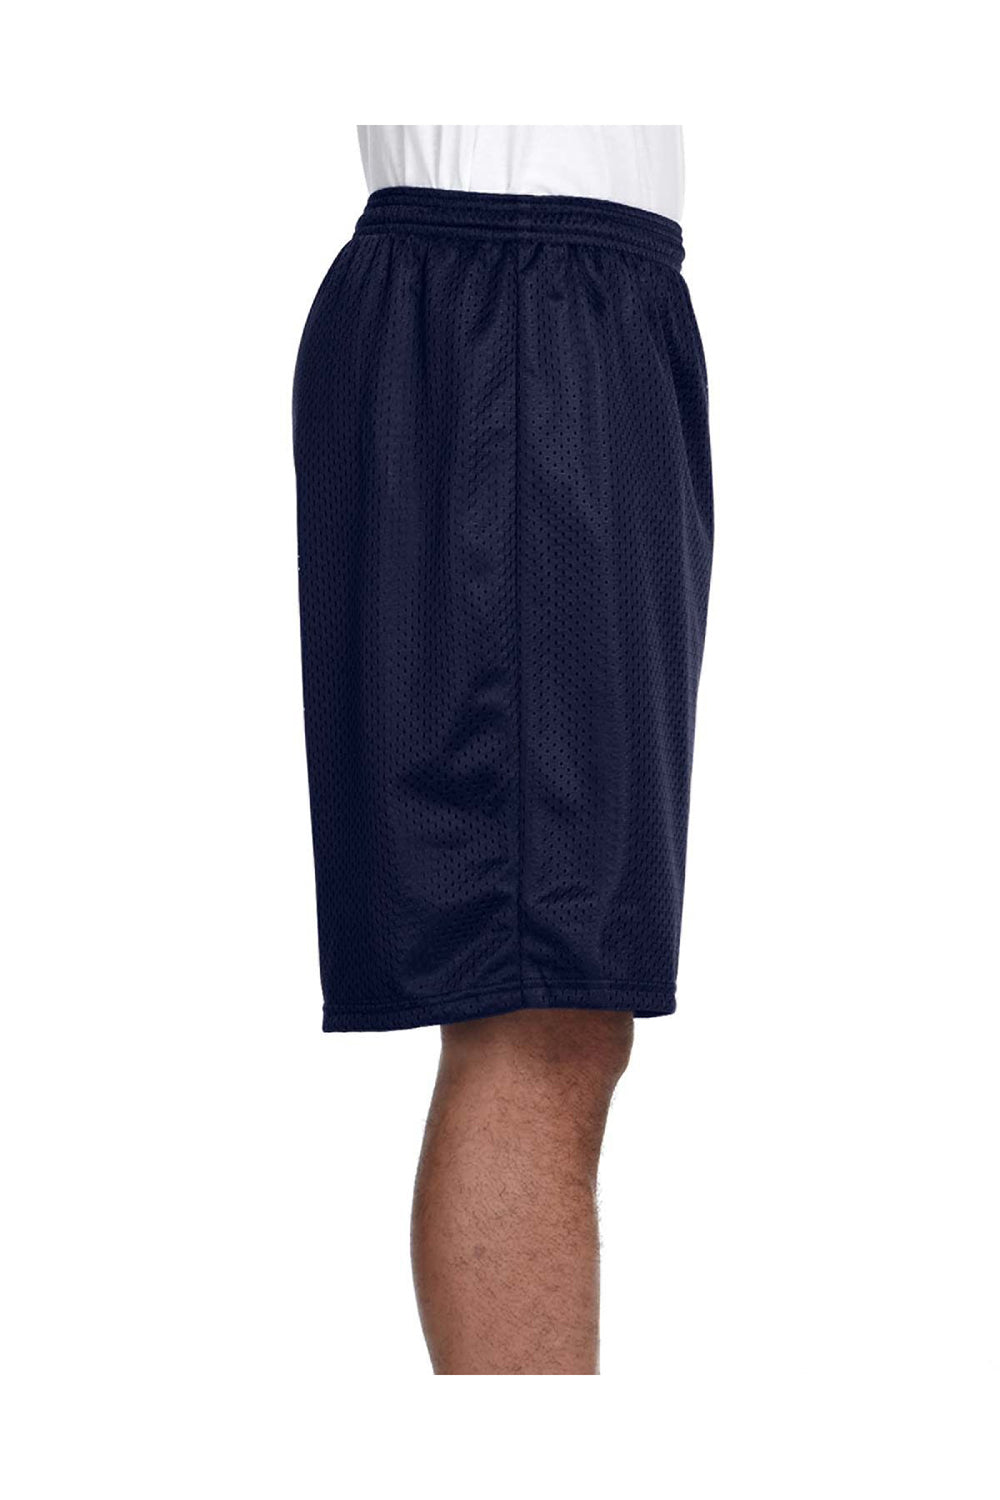 A4 N5296 Mens Moisture Wicking Tricot Mesh Shorts Navy Blue Model Side